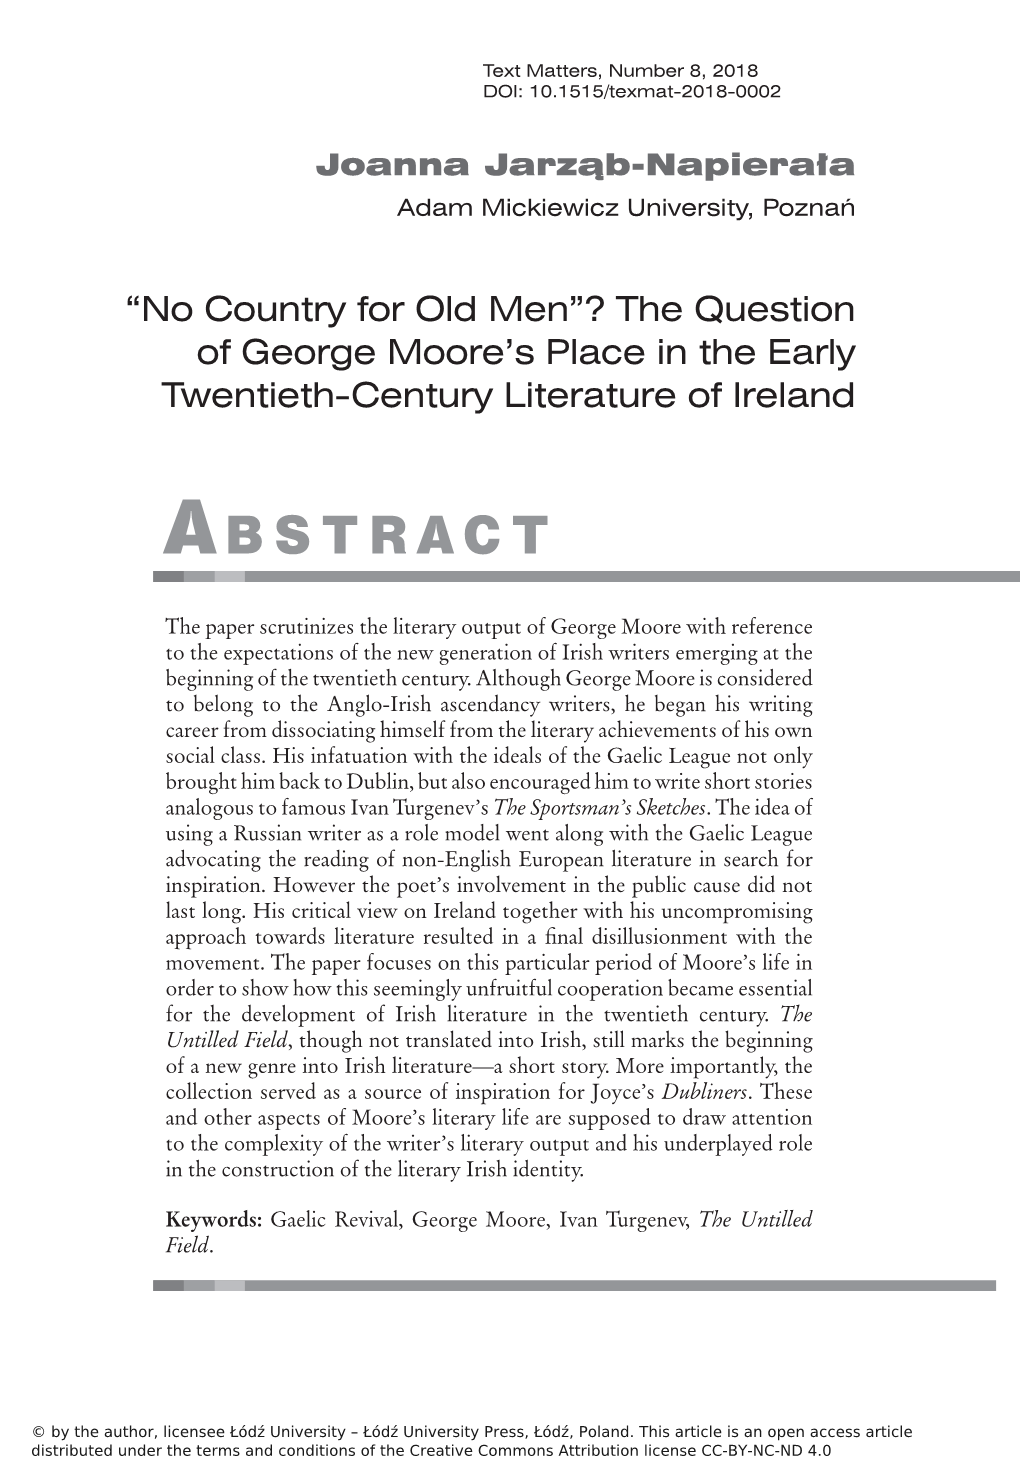 Abstraction and Commerce, and the Irish Expressing the Spontaneity, Vividness and Freshness of Ireland, Untouched by Modernity (Welch, Preface 7)